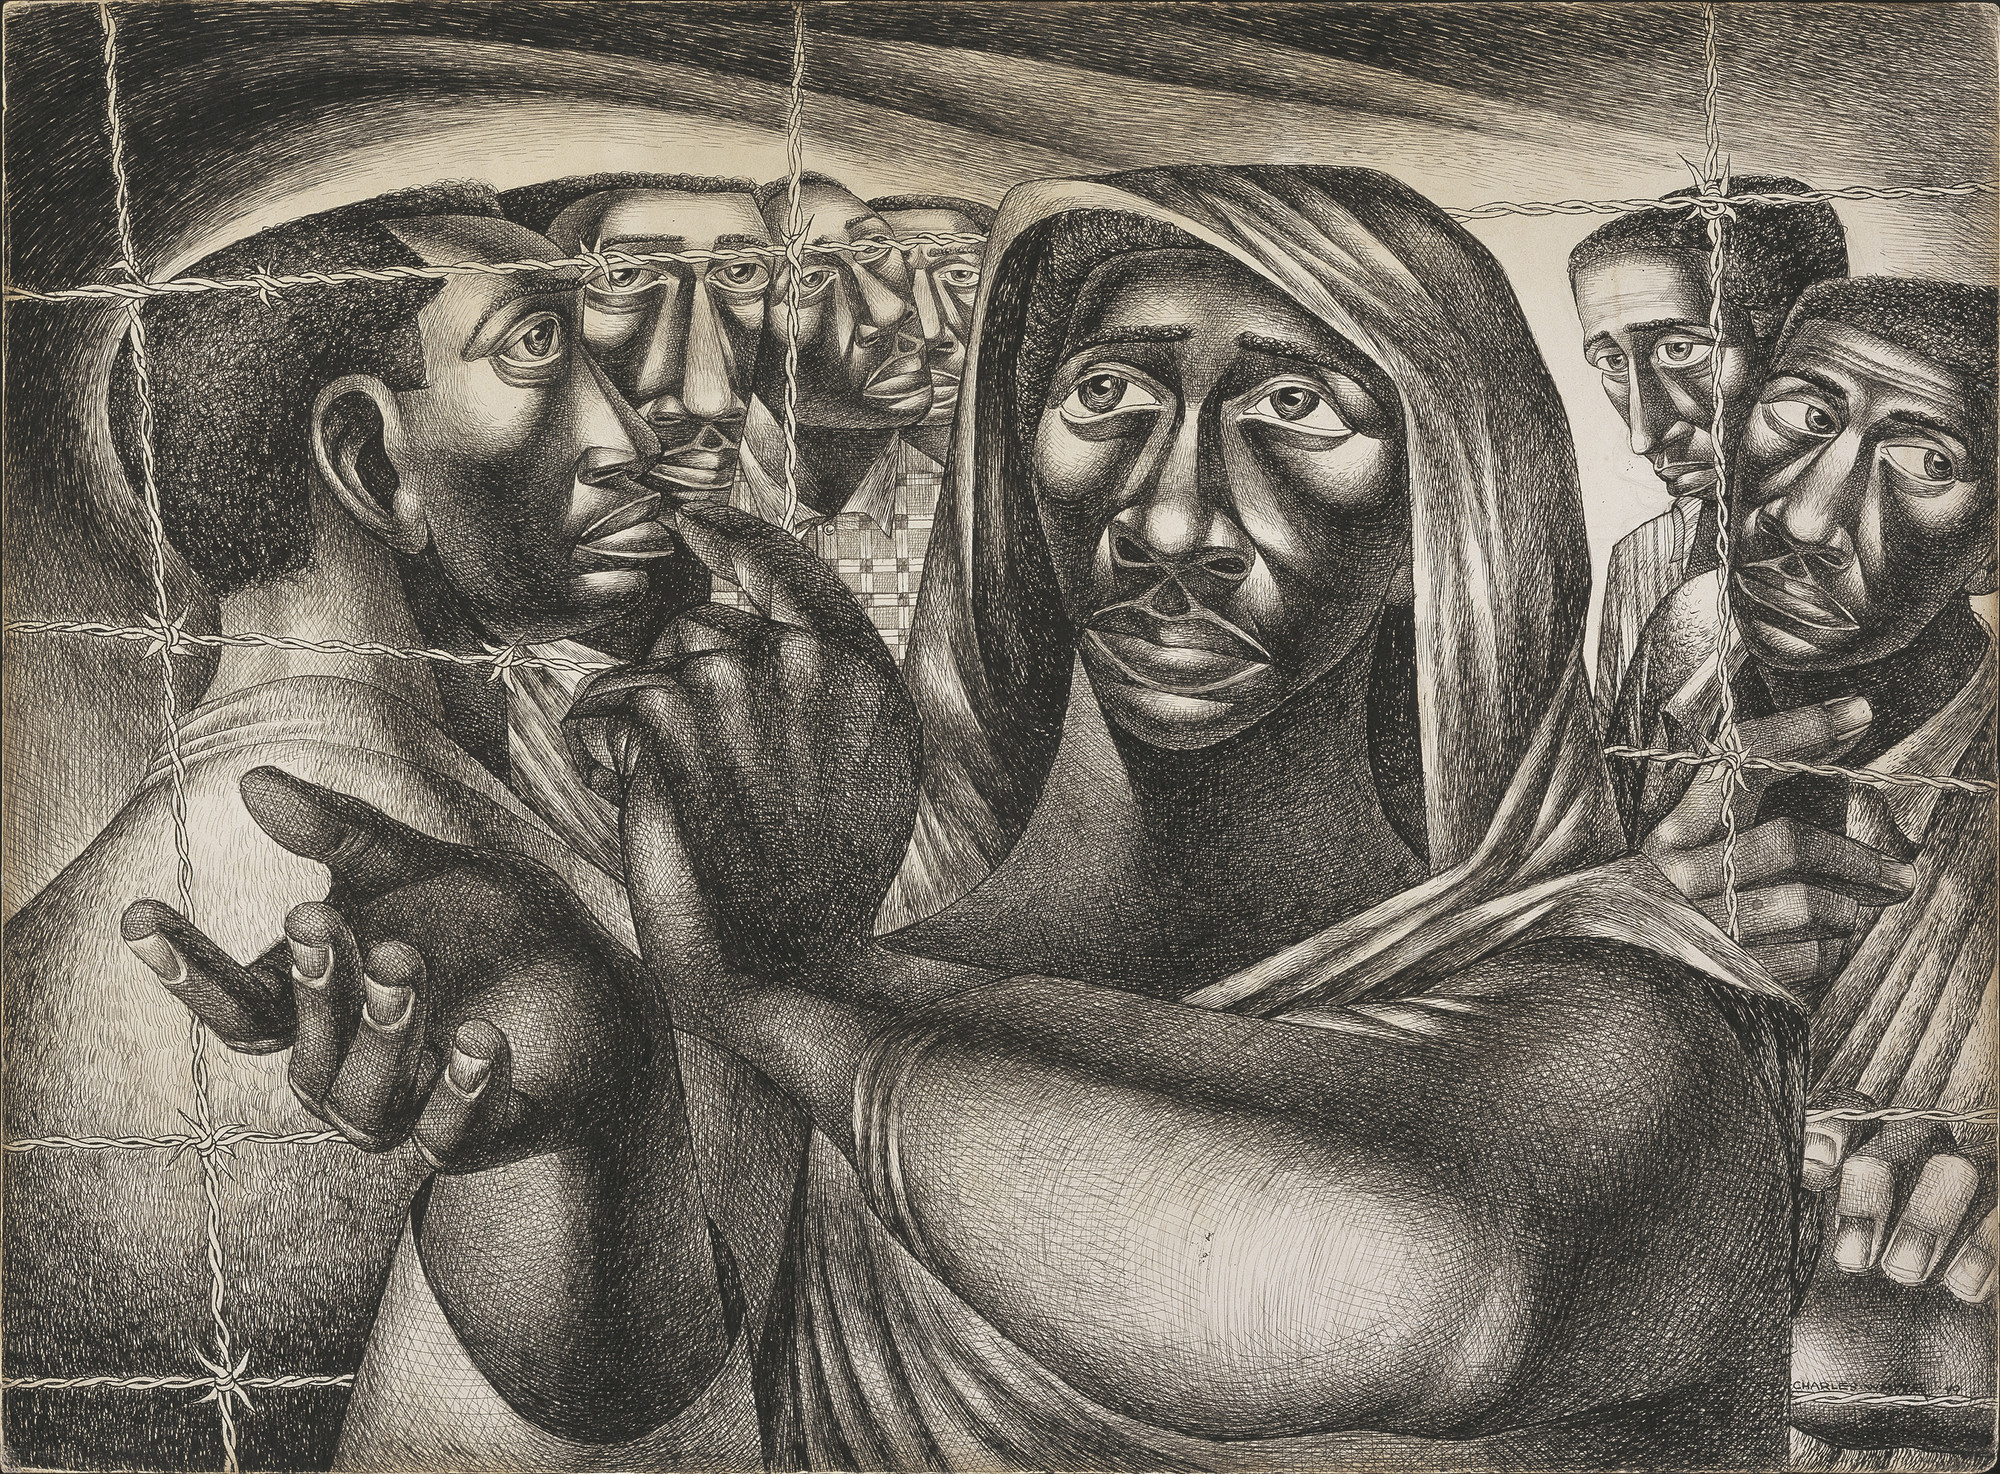 Charles White. _Trenton Six_. 1949. Ink over graphite underdrawing on paperboard. 21 15/16 × 29 7/8" (55.7 × 75.9 cm). Amon Carter Museum of American Art, Fort Worth, TX. © The Charles White Archives